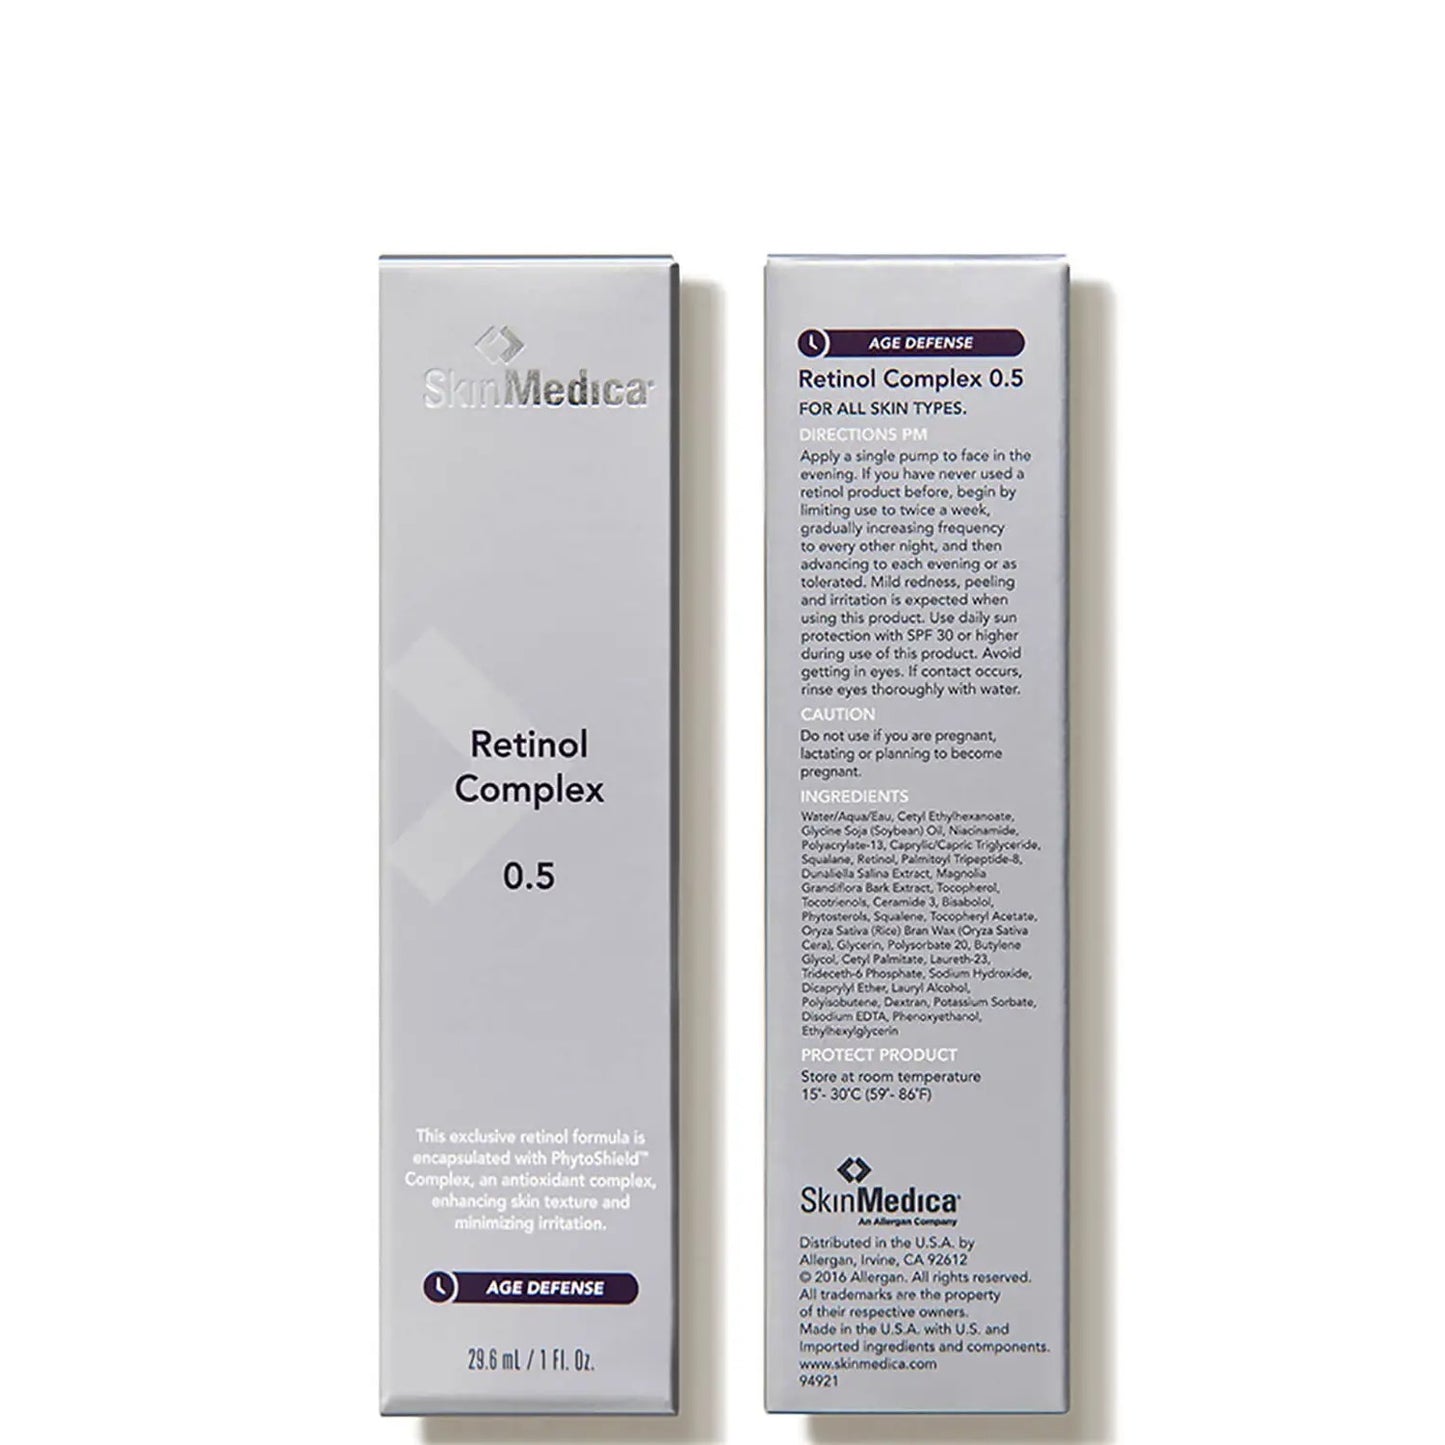 SkinMedica Retinol 0.5 Complex before and after